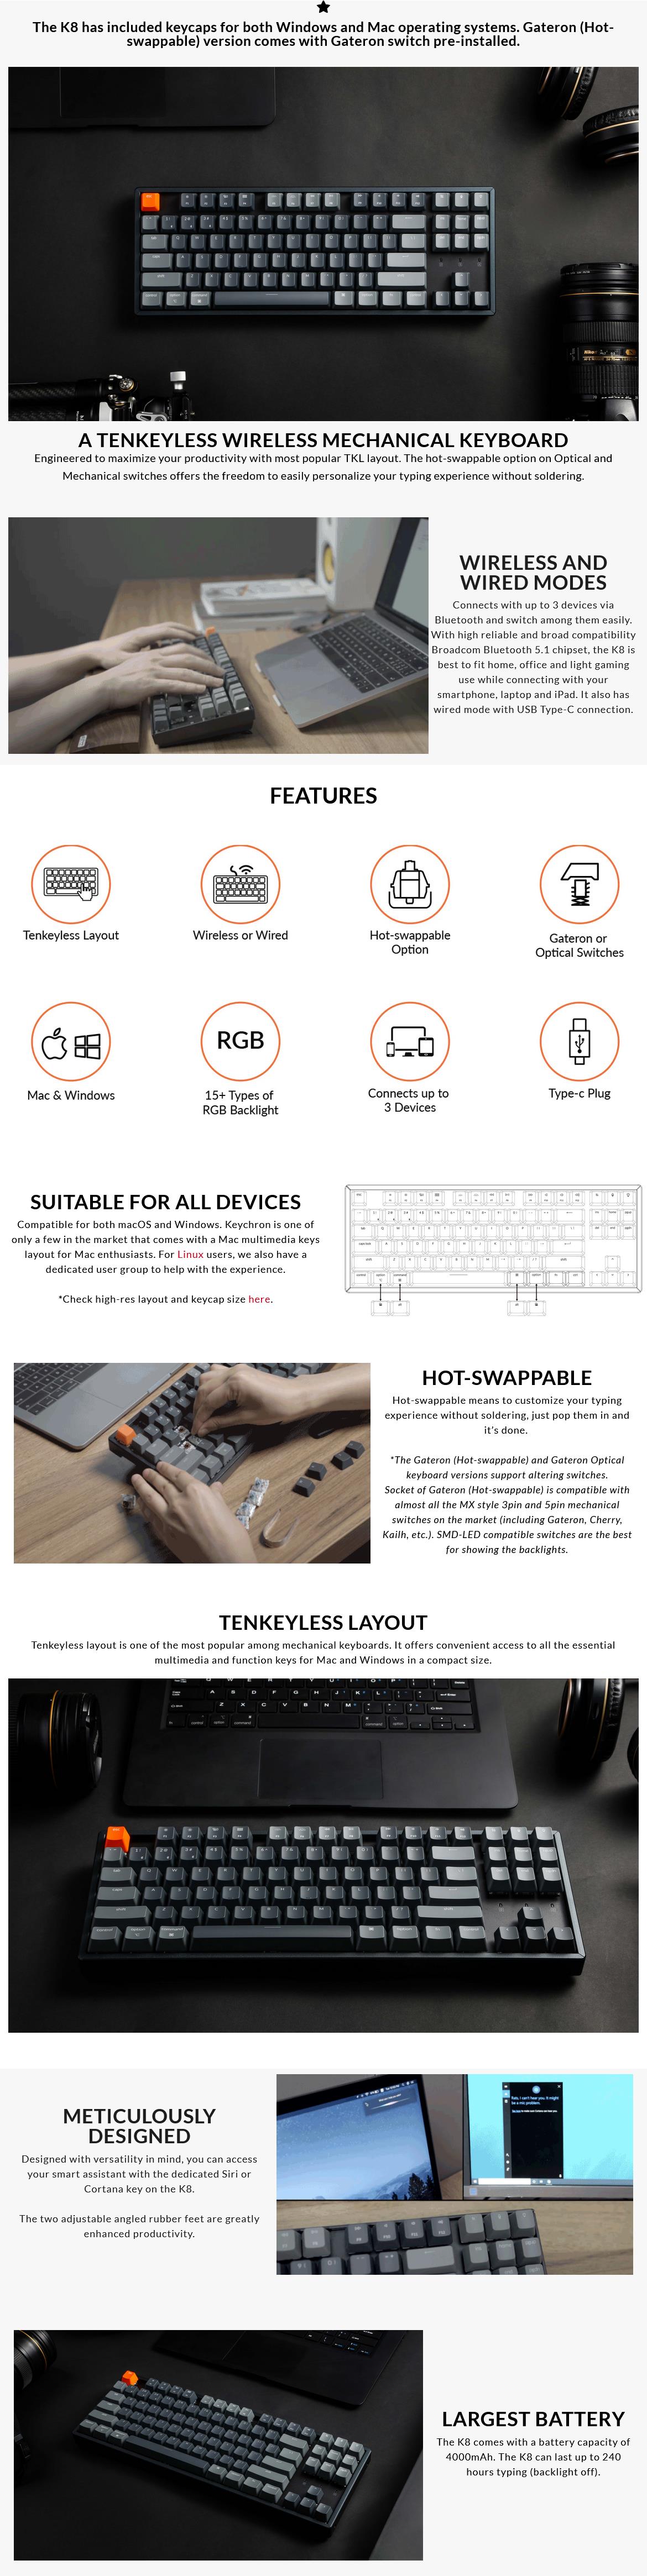 A large marketing image providing additional information about the product Keychron K8 TKL RGB Wireless Mechanical Keyboard (Red Switch) - Additional alt info not provided